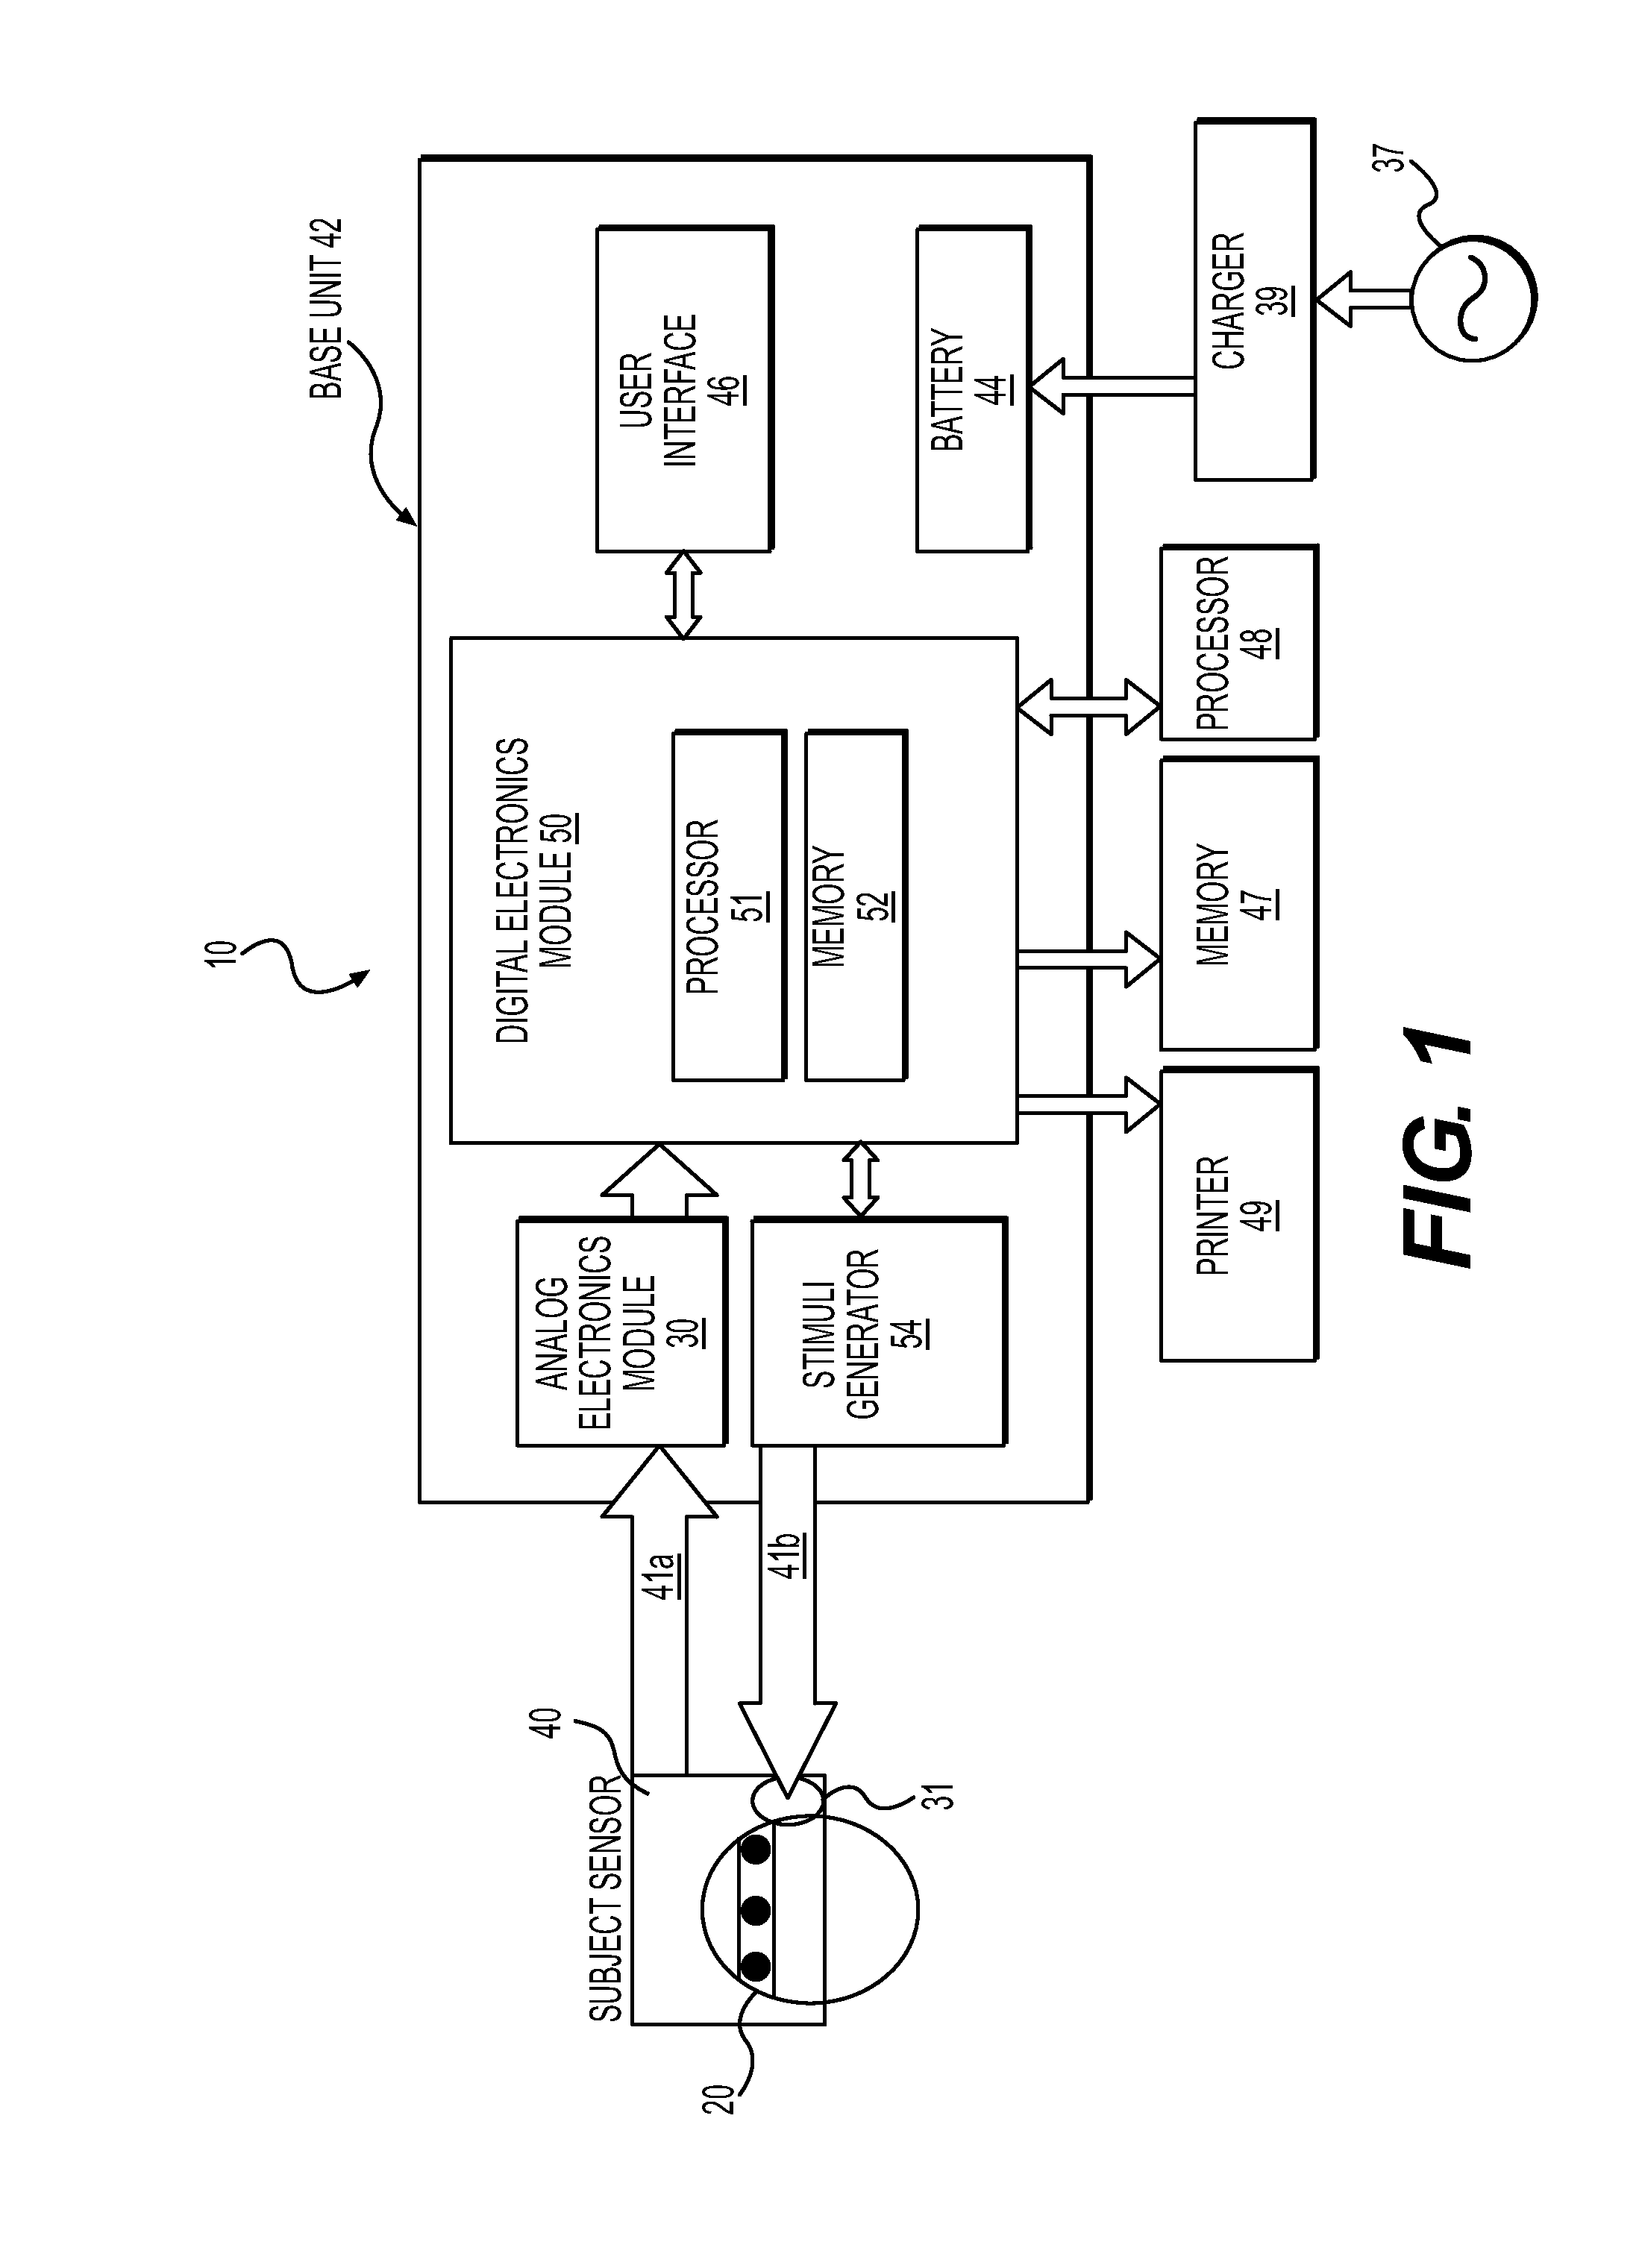 Electrode array and method of placement